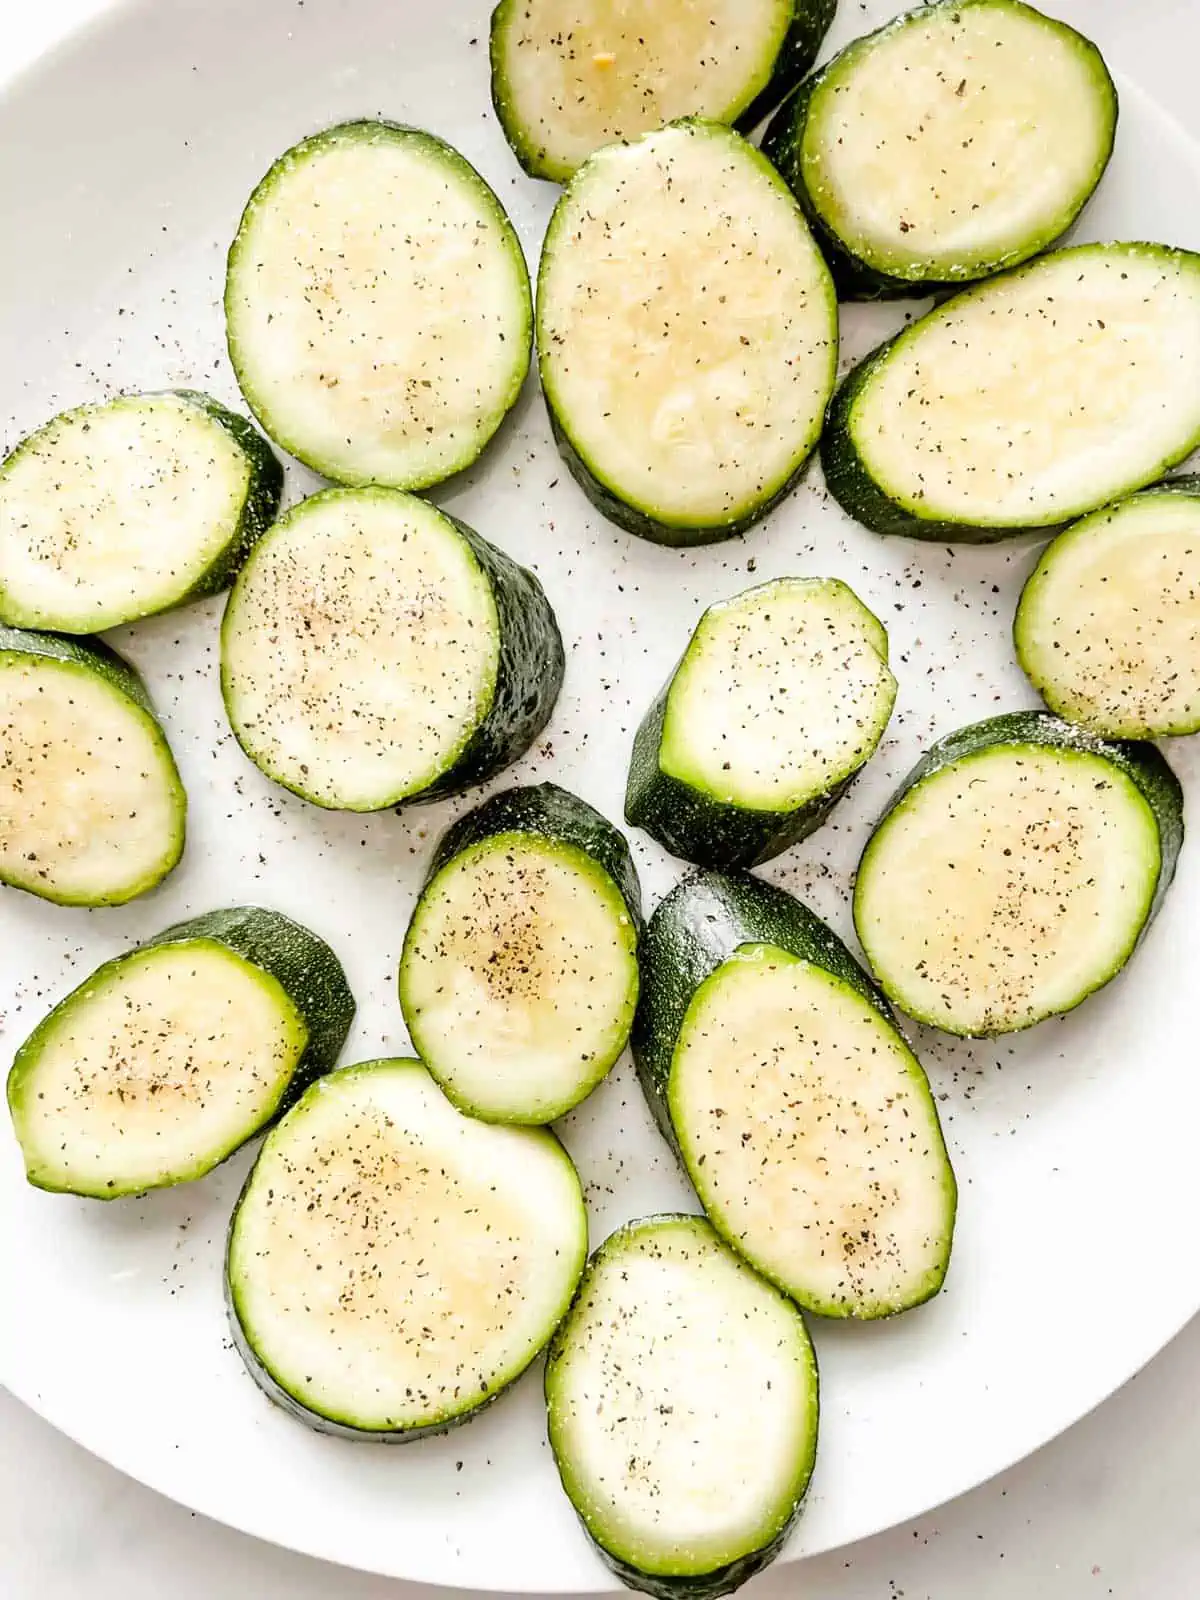 A plate of sliced zucchini that has been seasoned with salt and pepper.